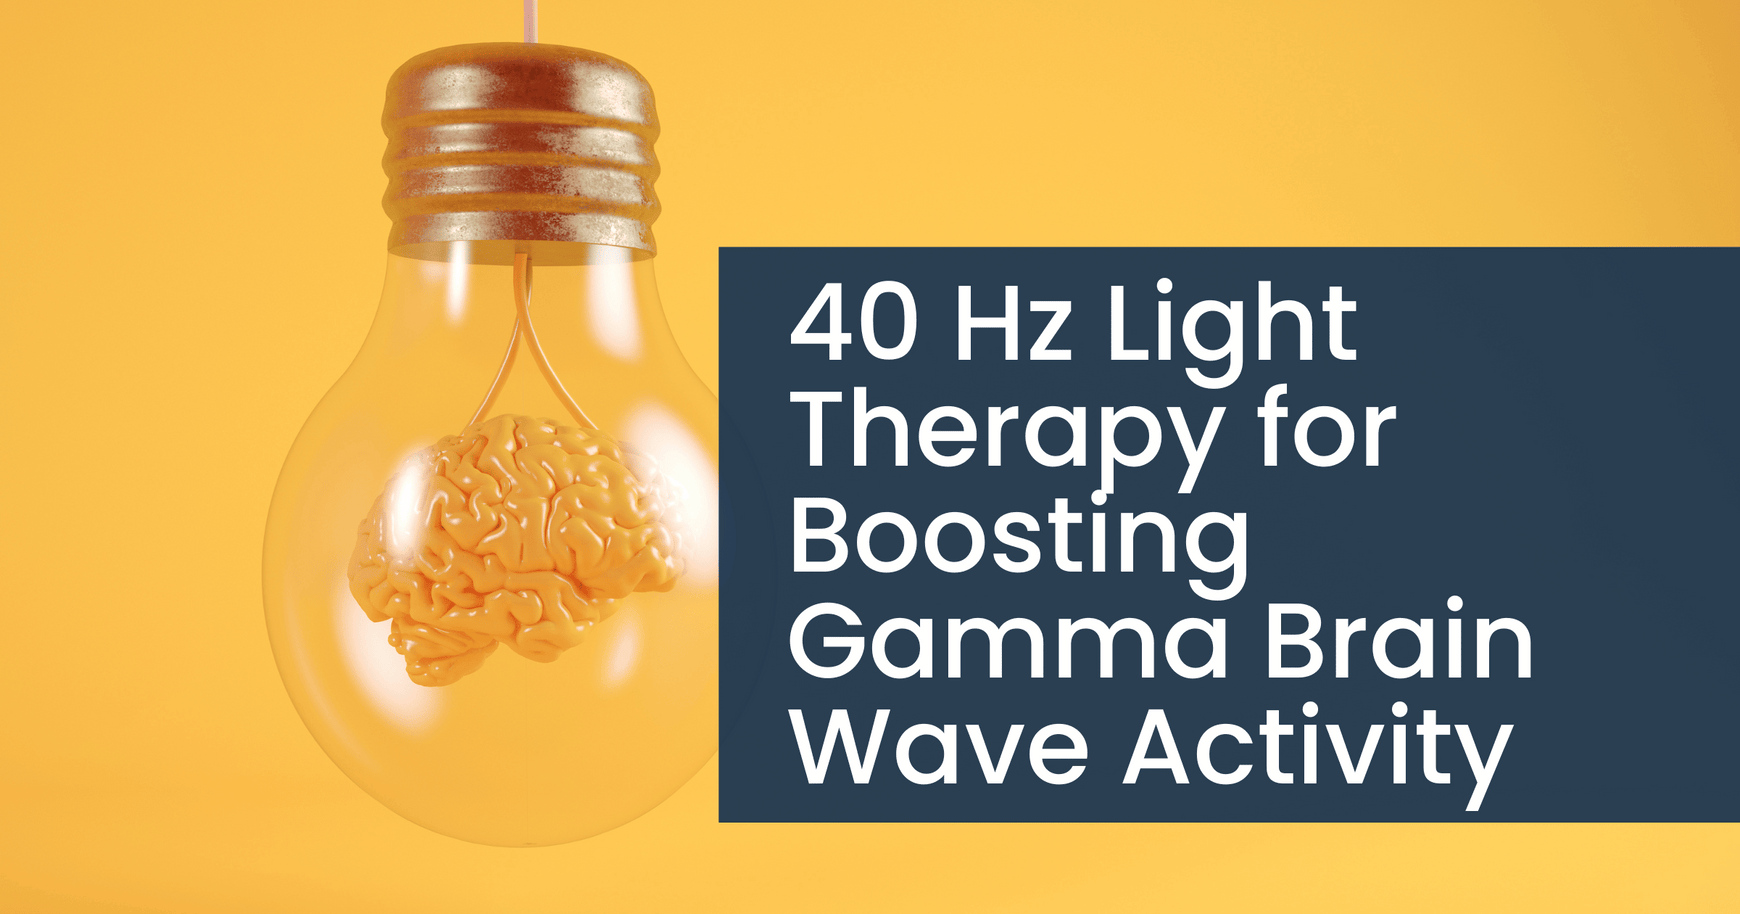 40 Hz Light Therapy for Boosting Gamma Brain Wave Activity